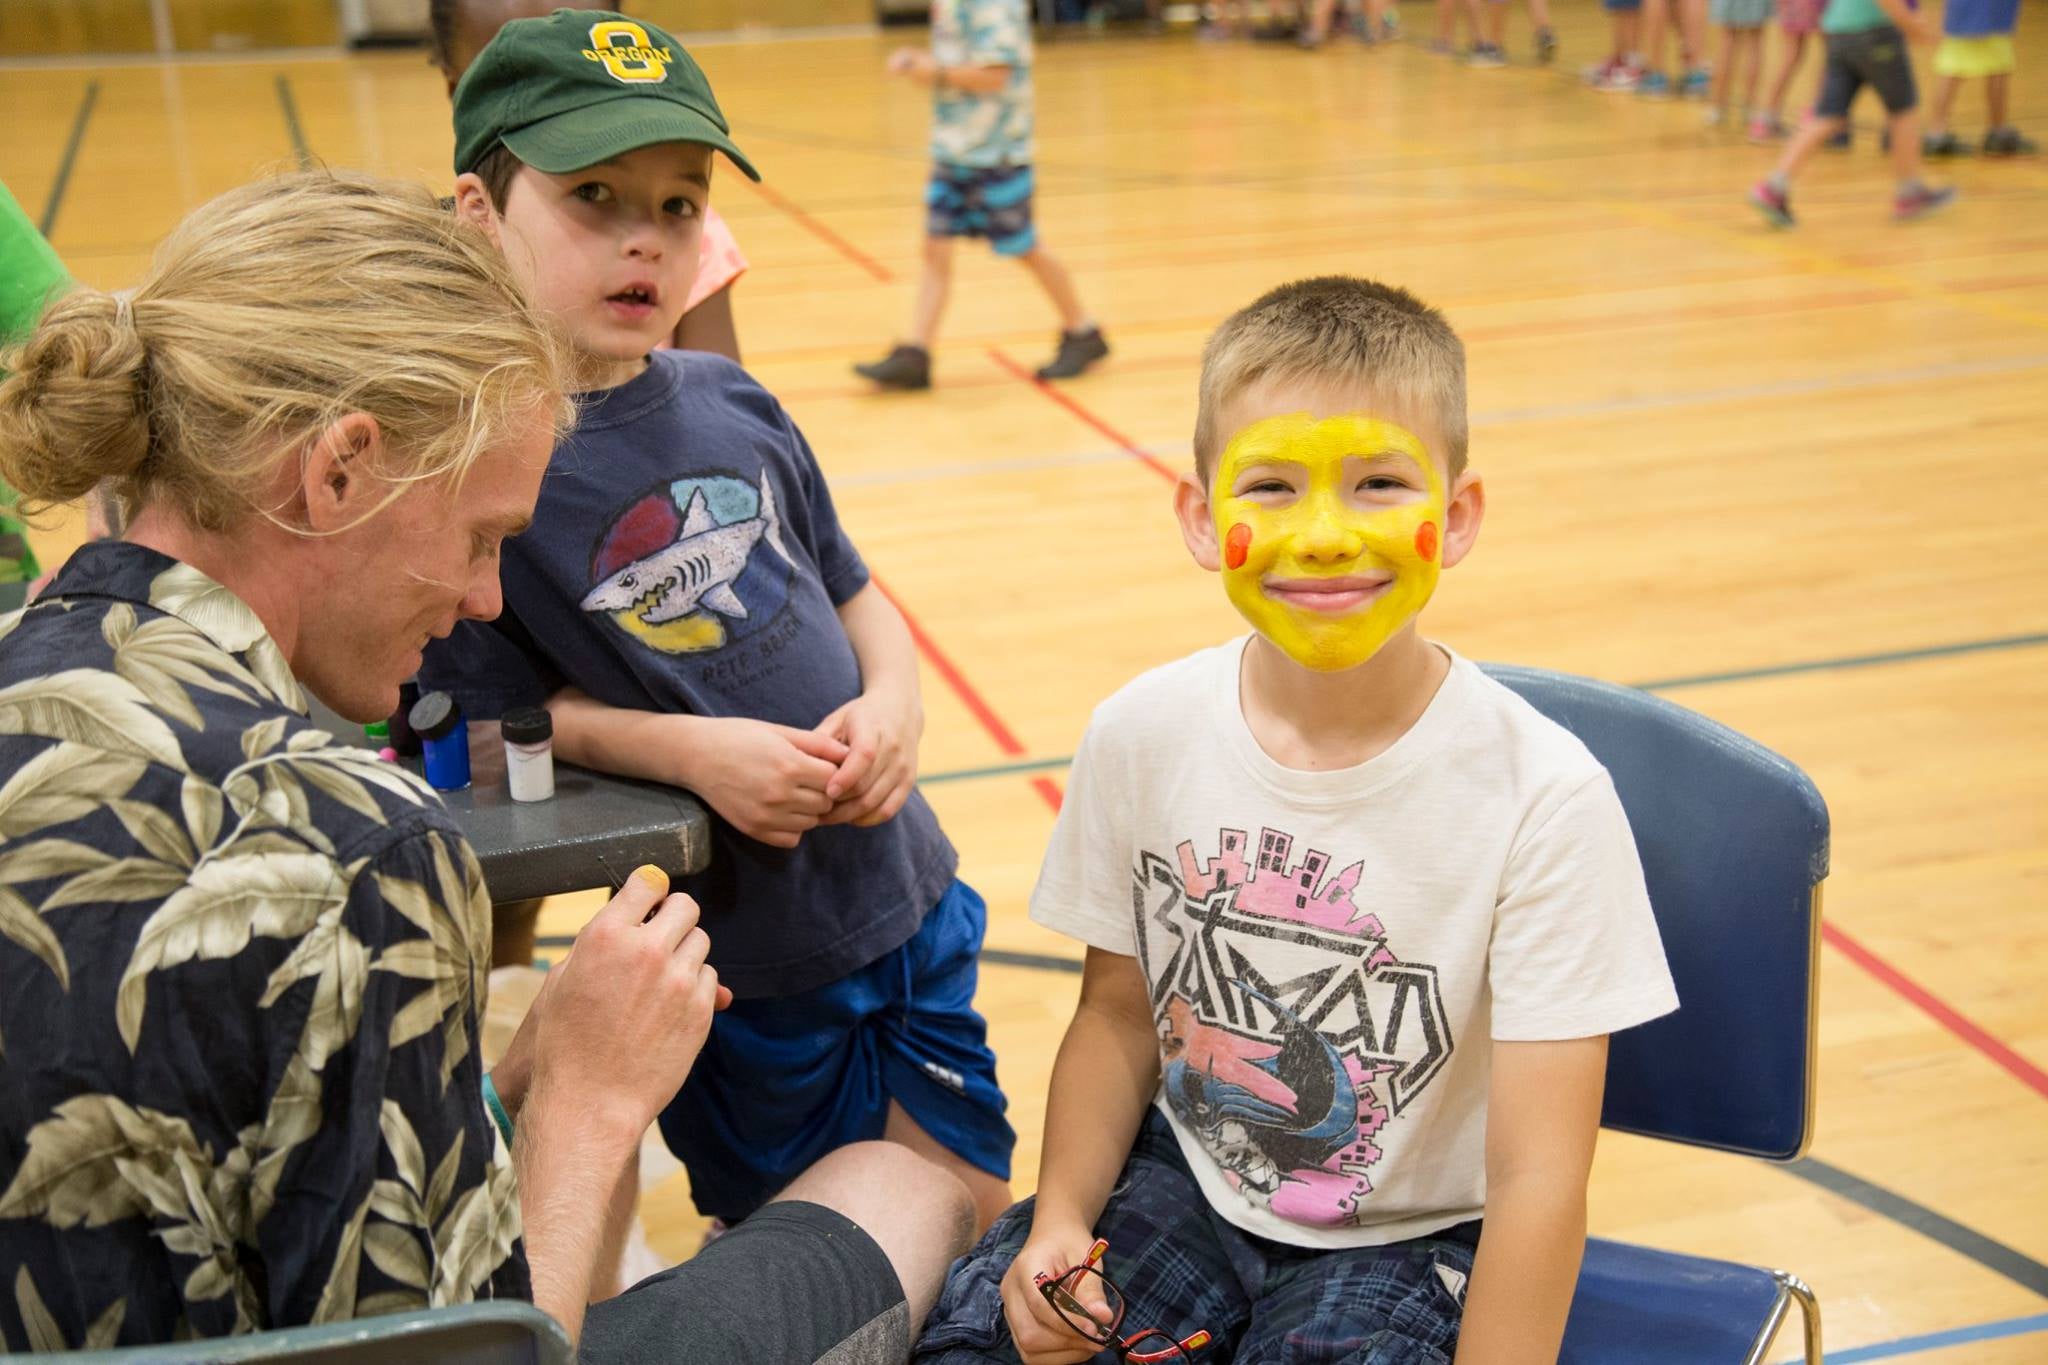 Two children get their faces painted.